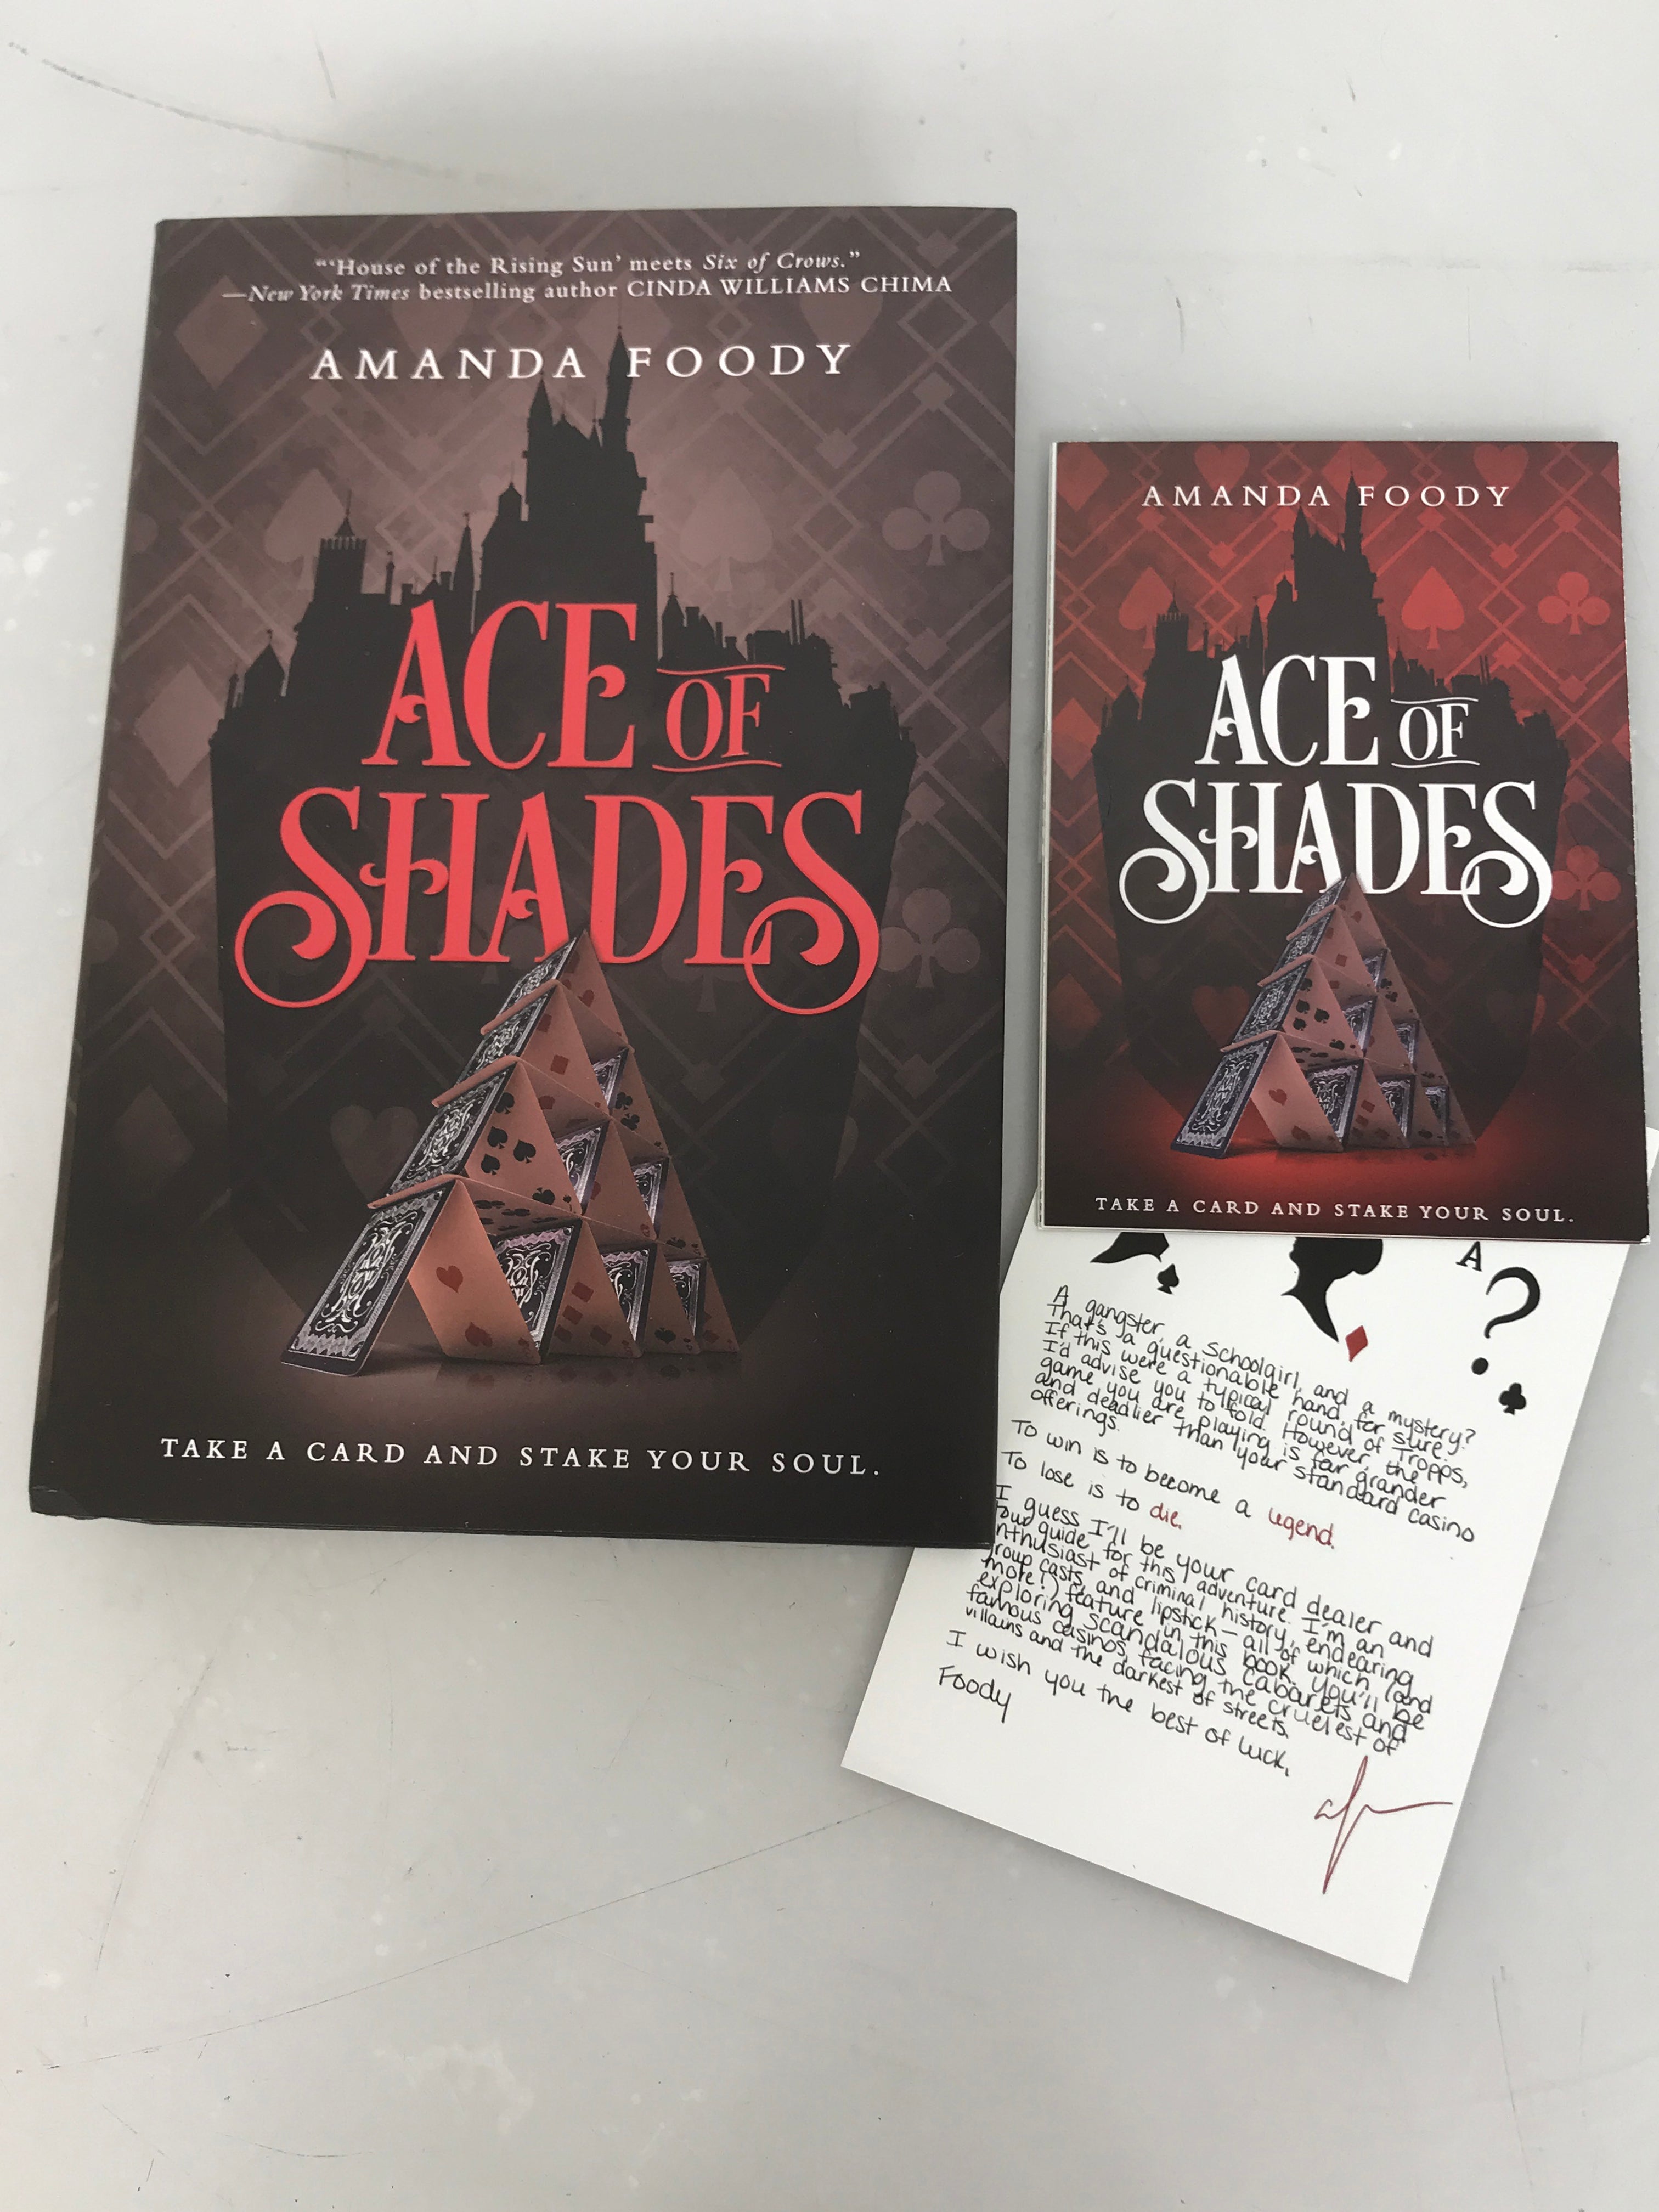 Ace of Shades by Amanda Foody Owl Crate Edition Signed by Author 2018